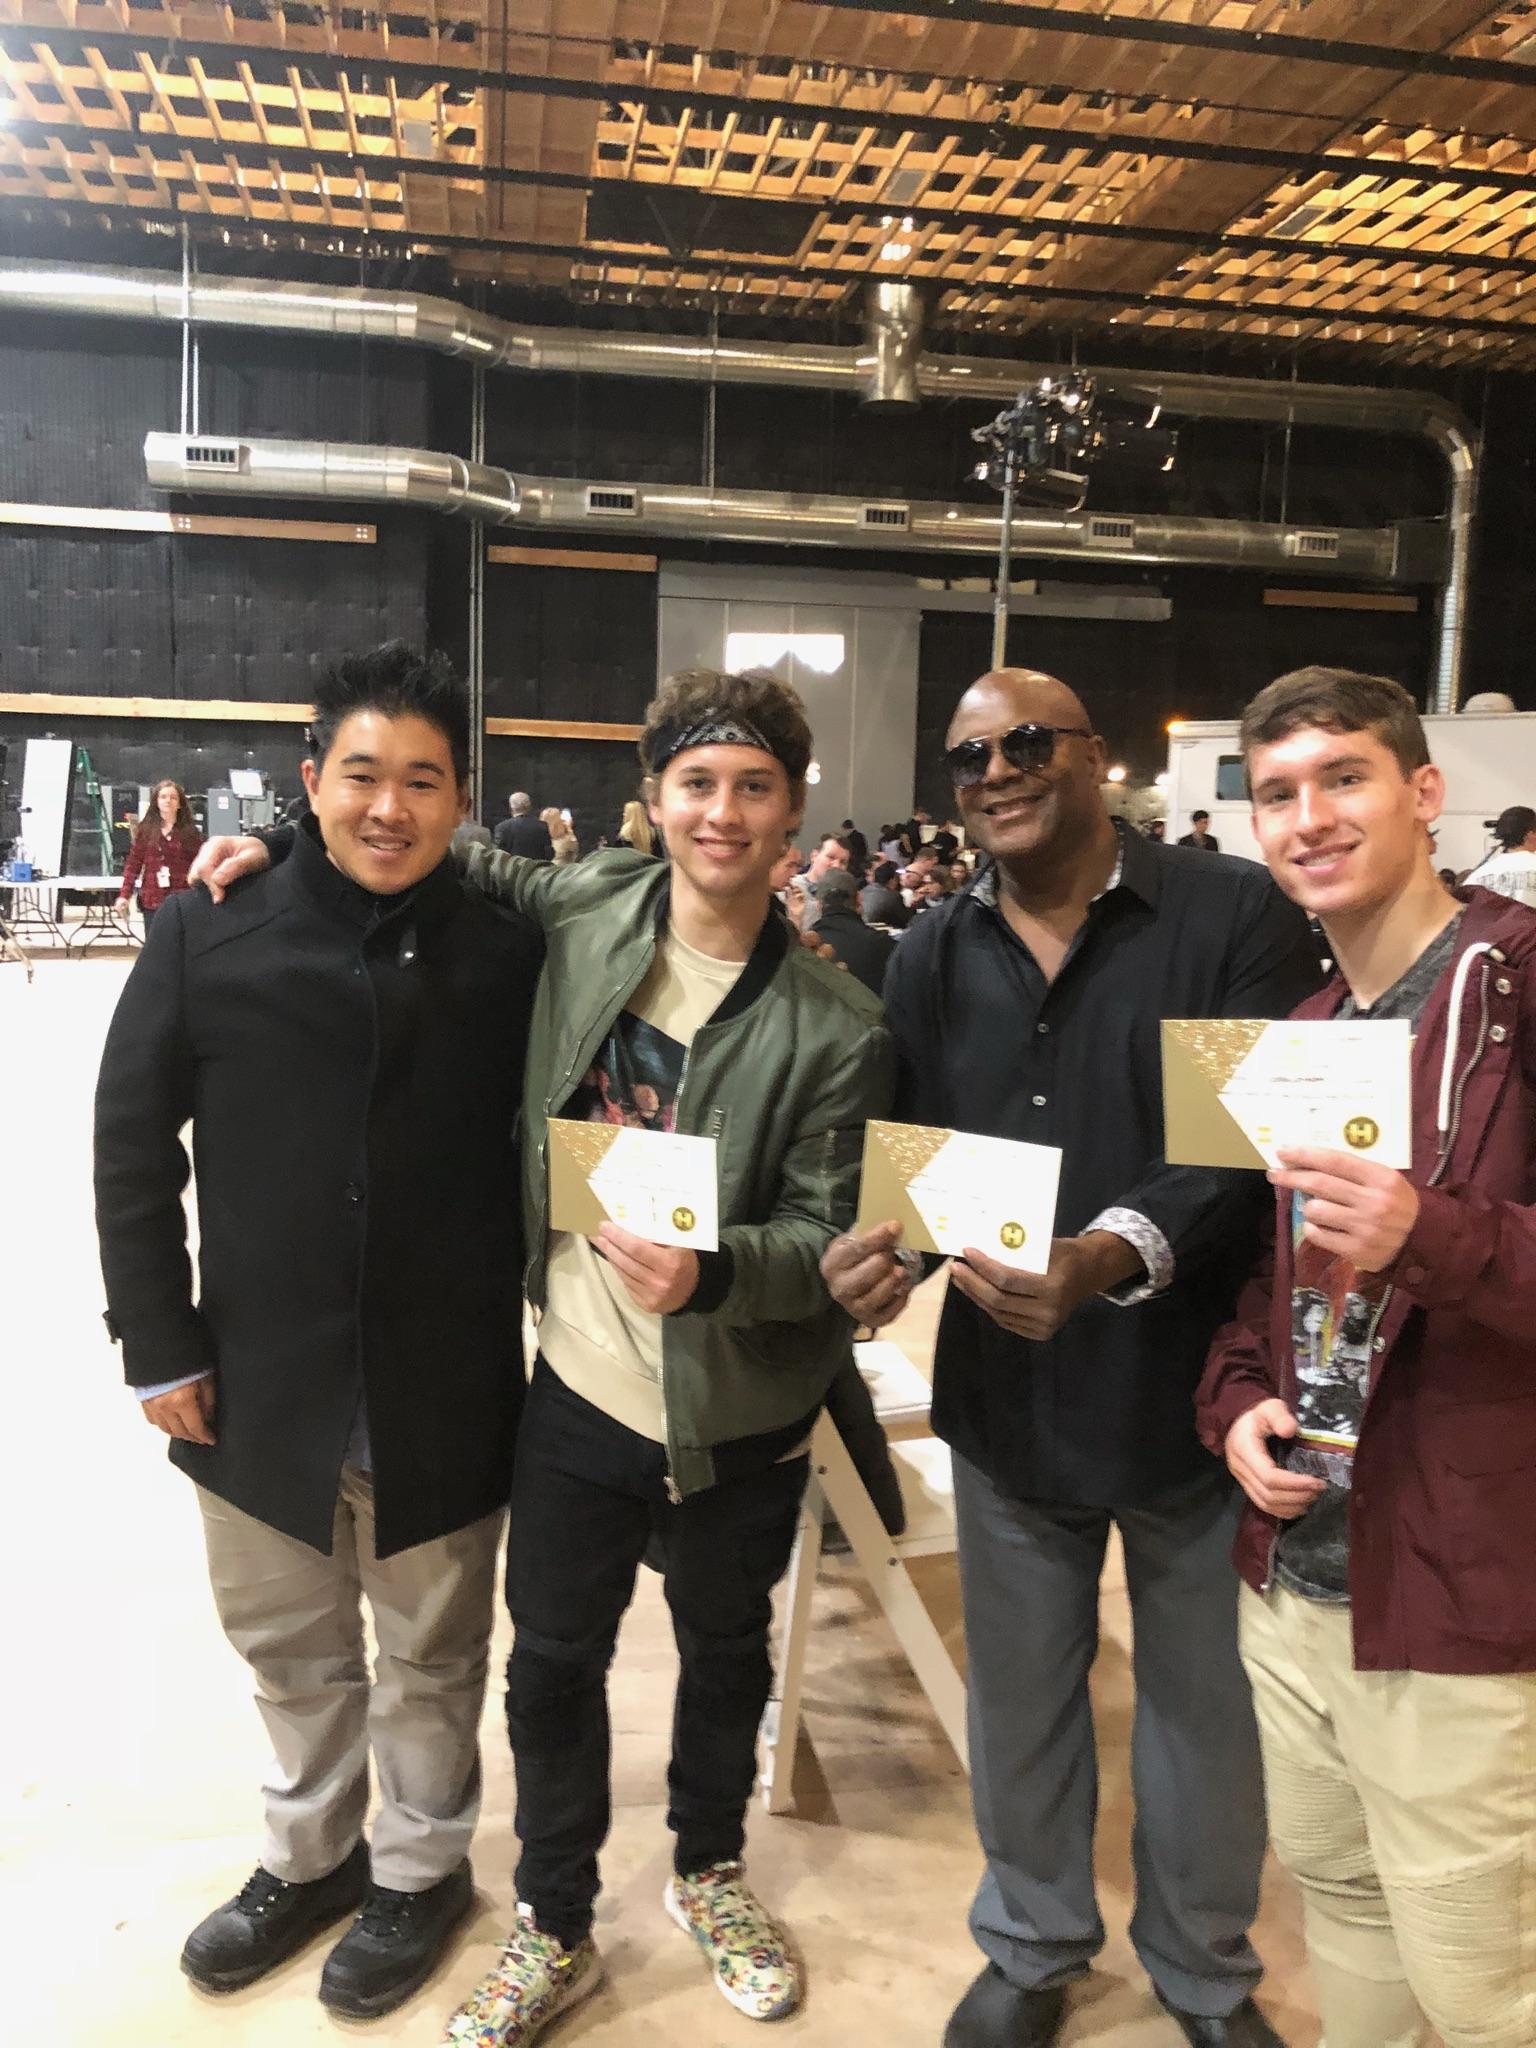 3Dimensional and Manager Willie Stewart displaying gift of cryptocurrency received from Haracoin similar to gifts given to many other celebrities during the 2018 Sundance Film Festival